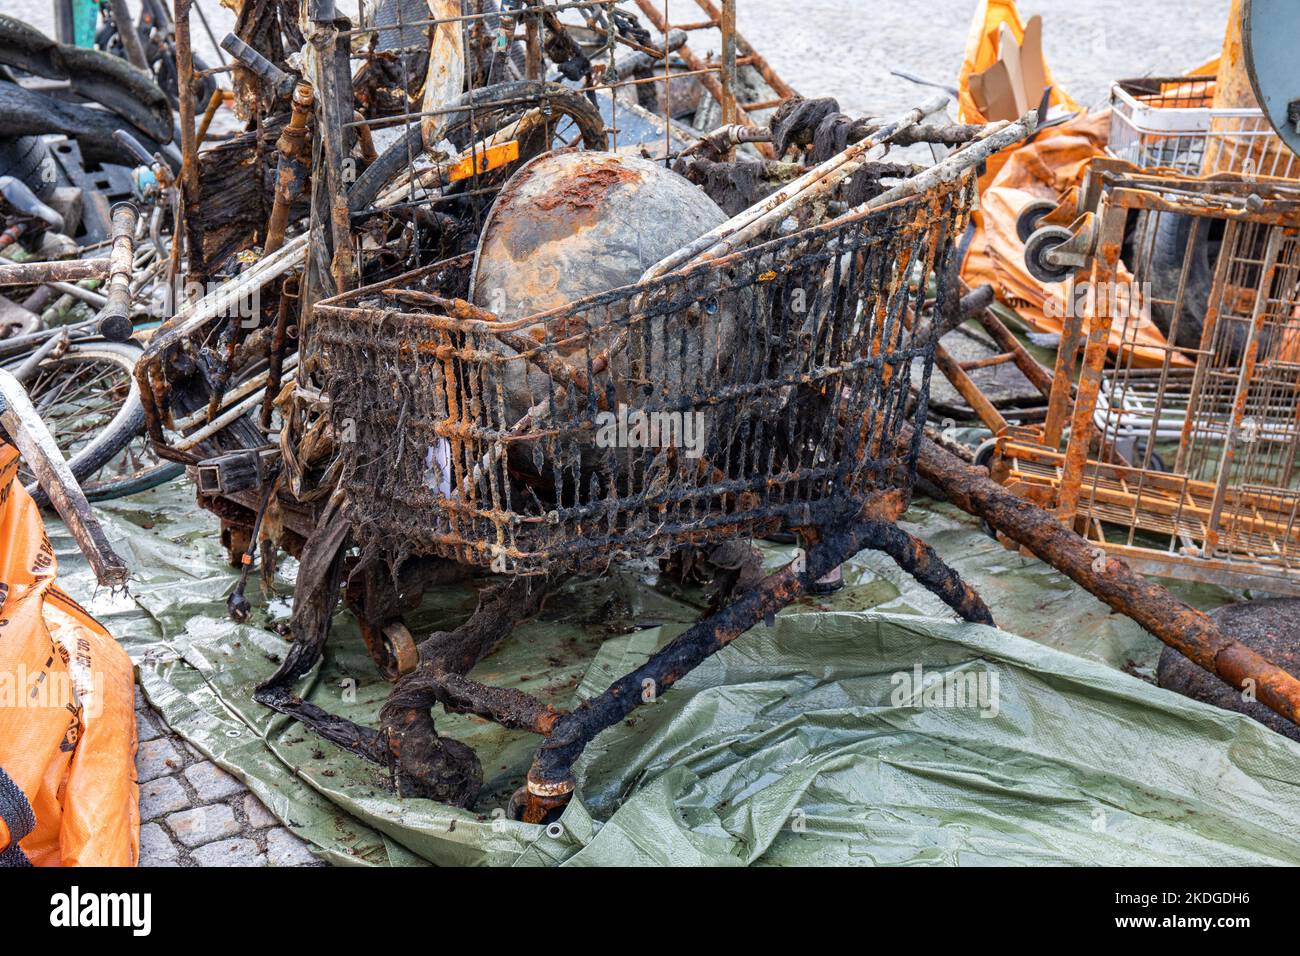 Rusty old shopping cart and other items salvaged from sea in Nybroviken, Stockholm, Sweden Stock Photo